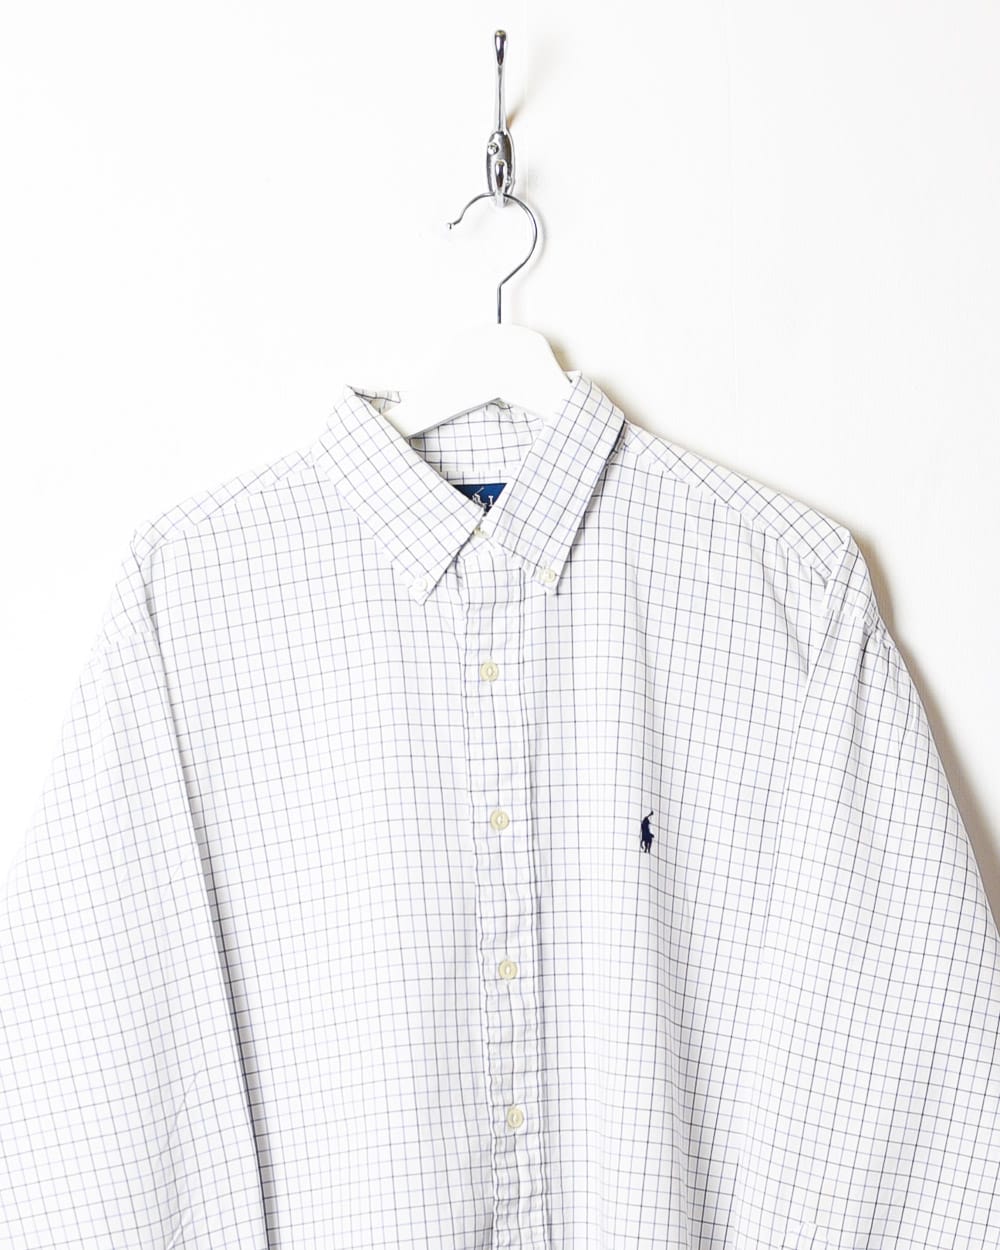 White Polo Ralph Lauren Yarmouth Checked Shirt - Large